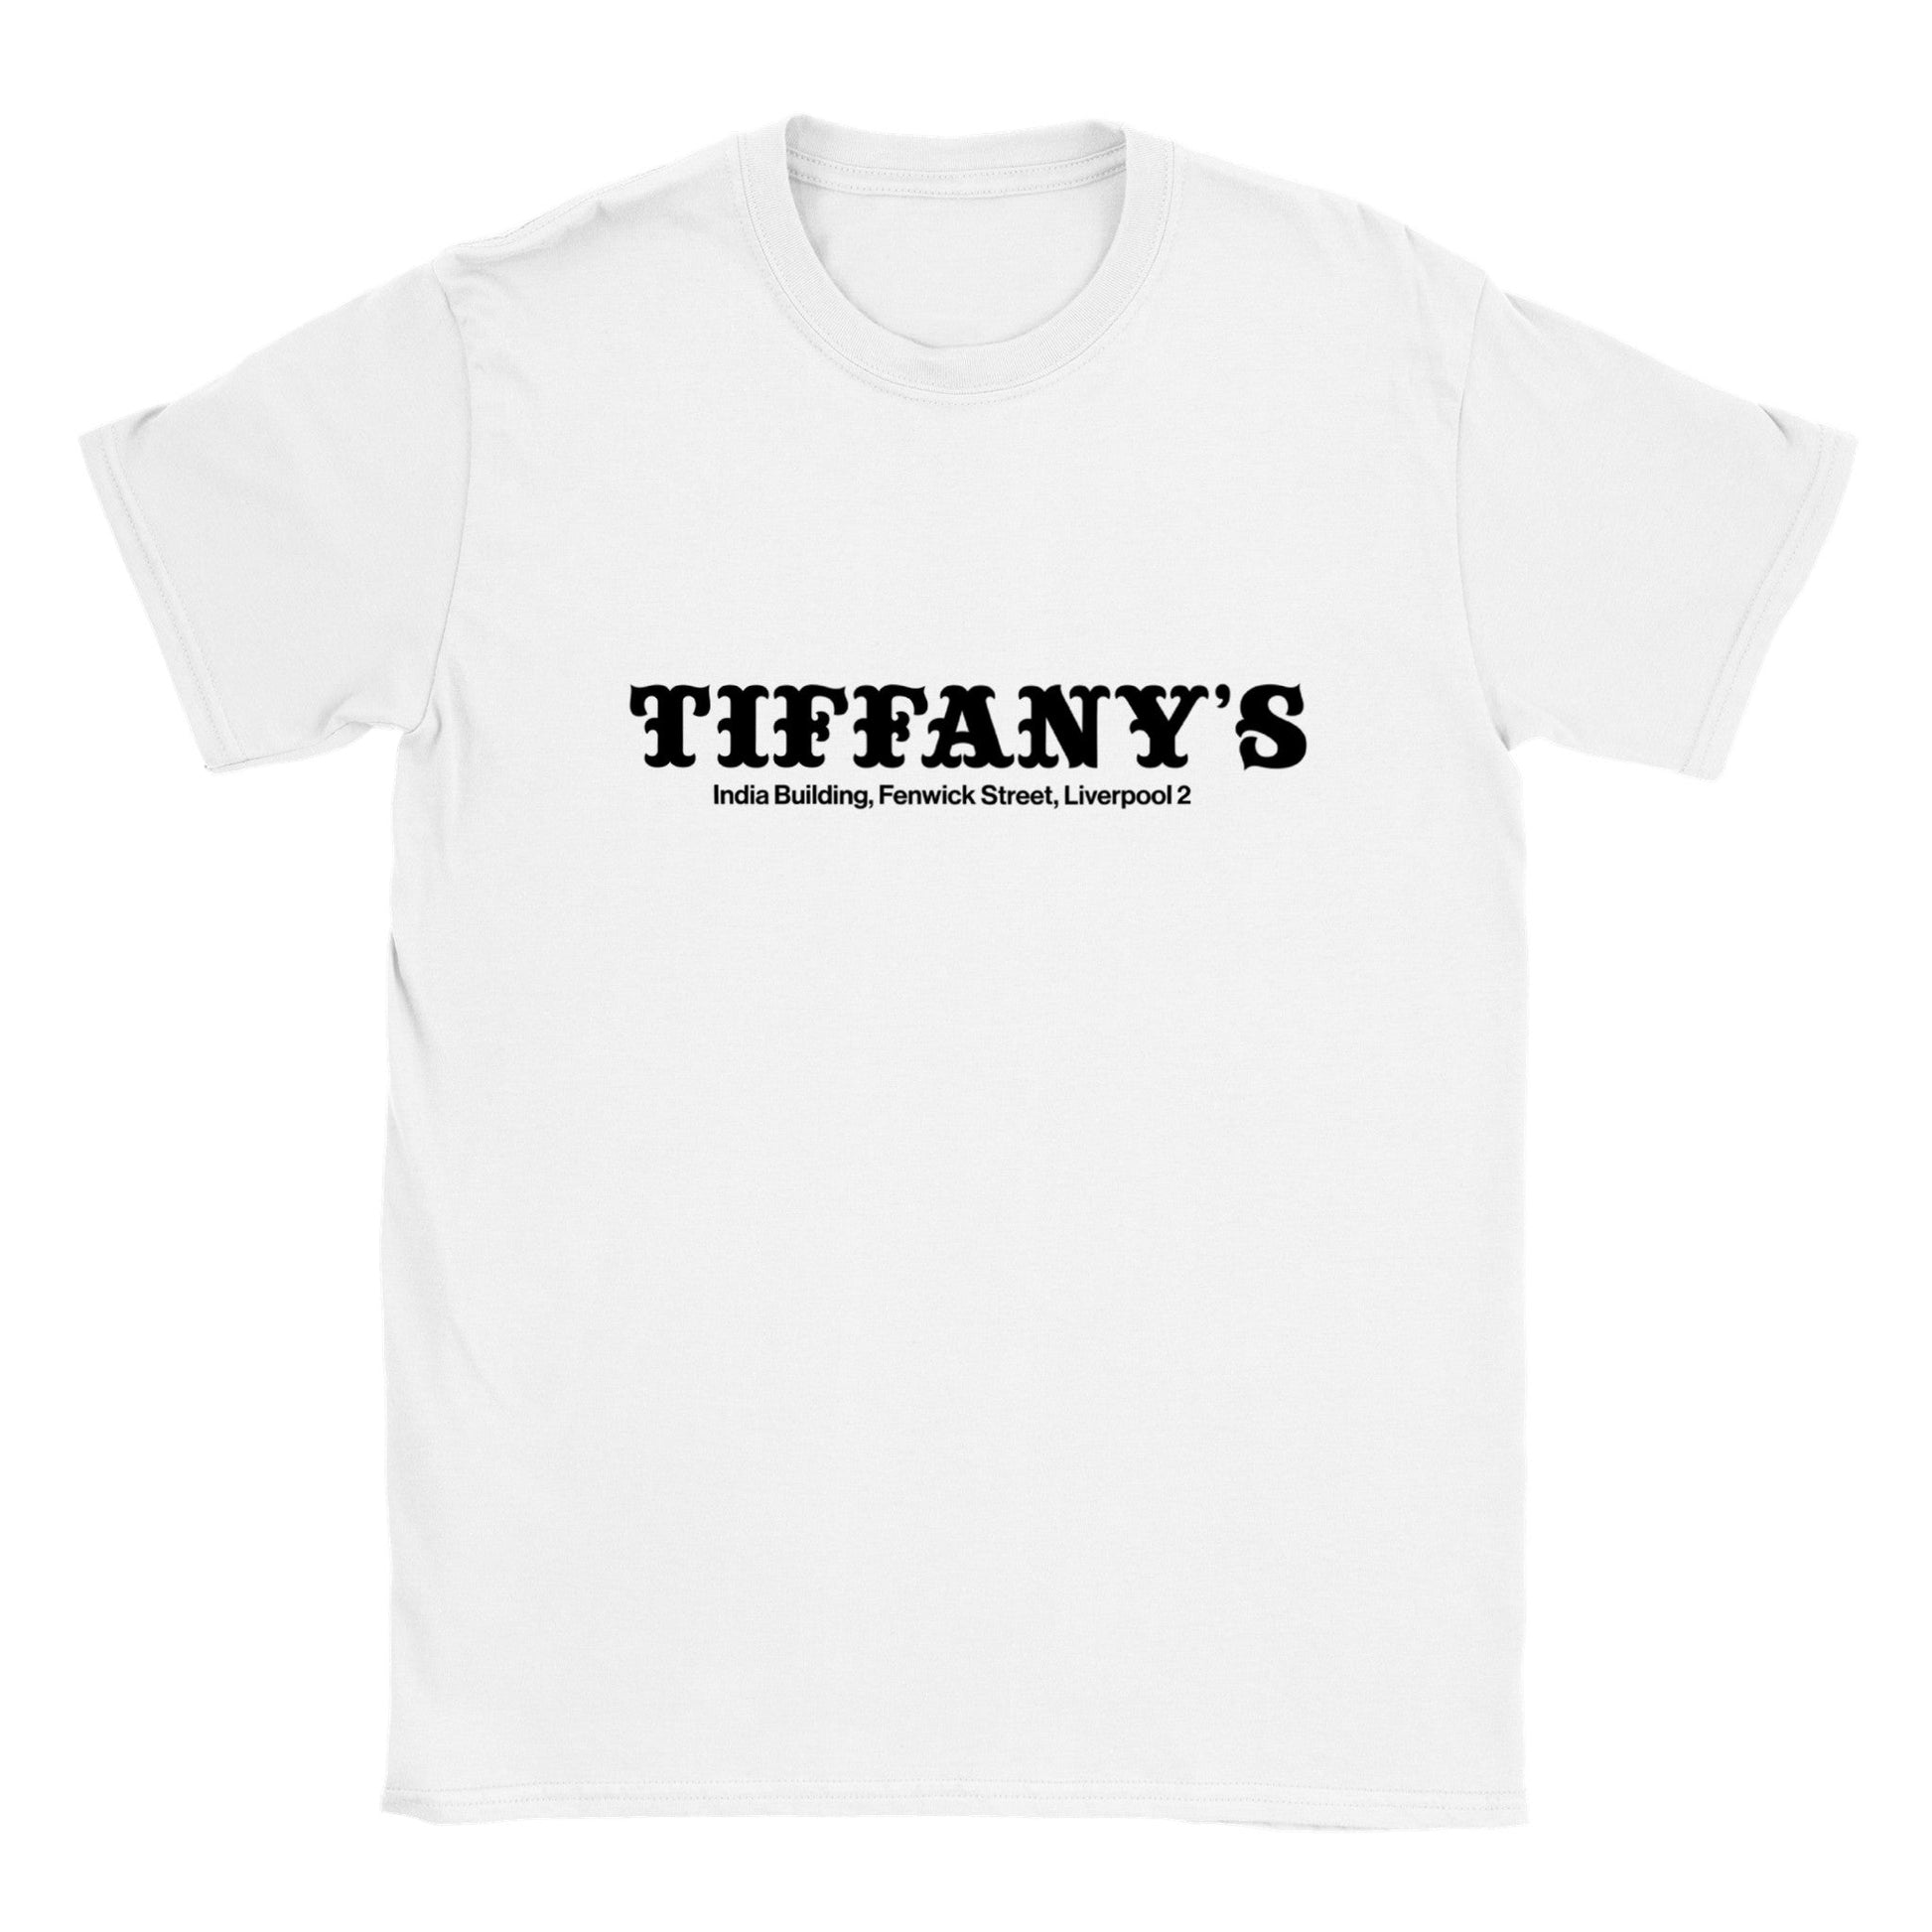 Tiffanys - Liverpool - unisex fit T-shirt - various colours - Dirty Stop Outs